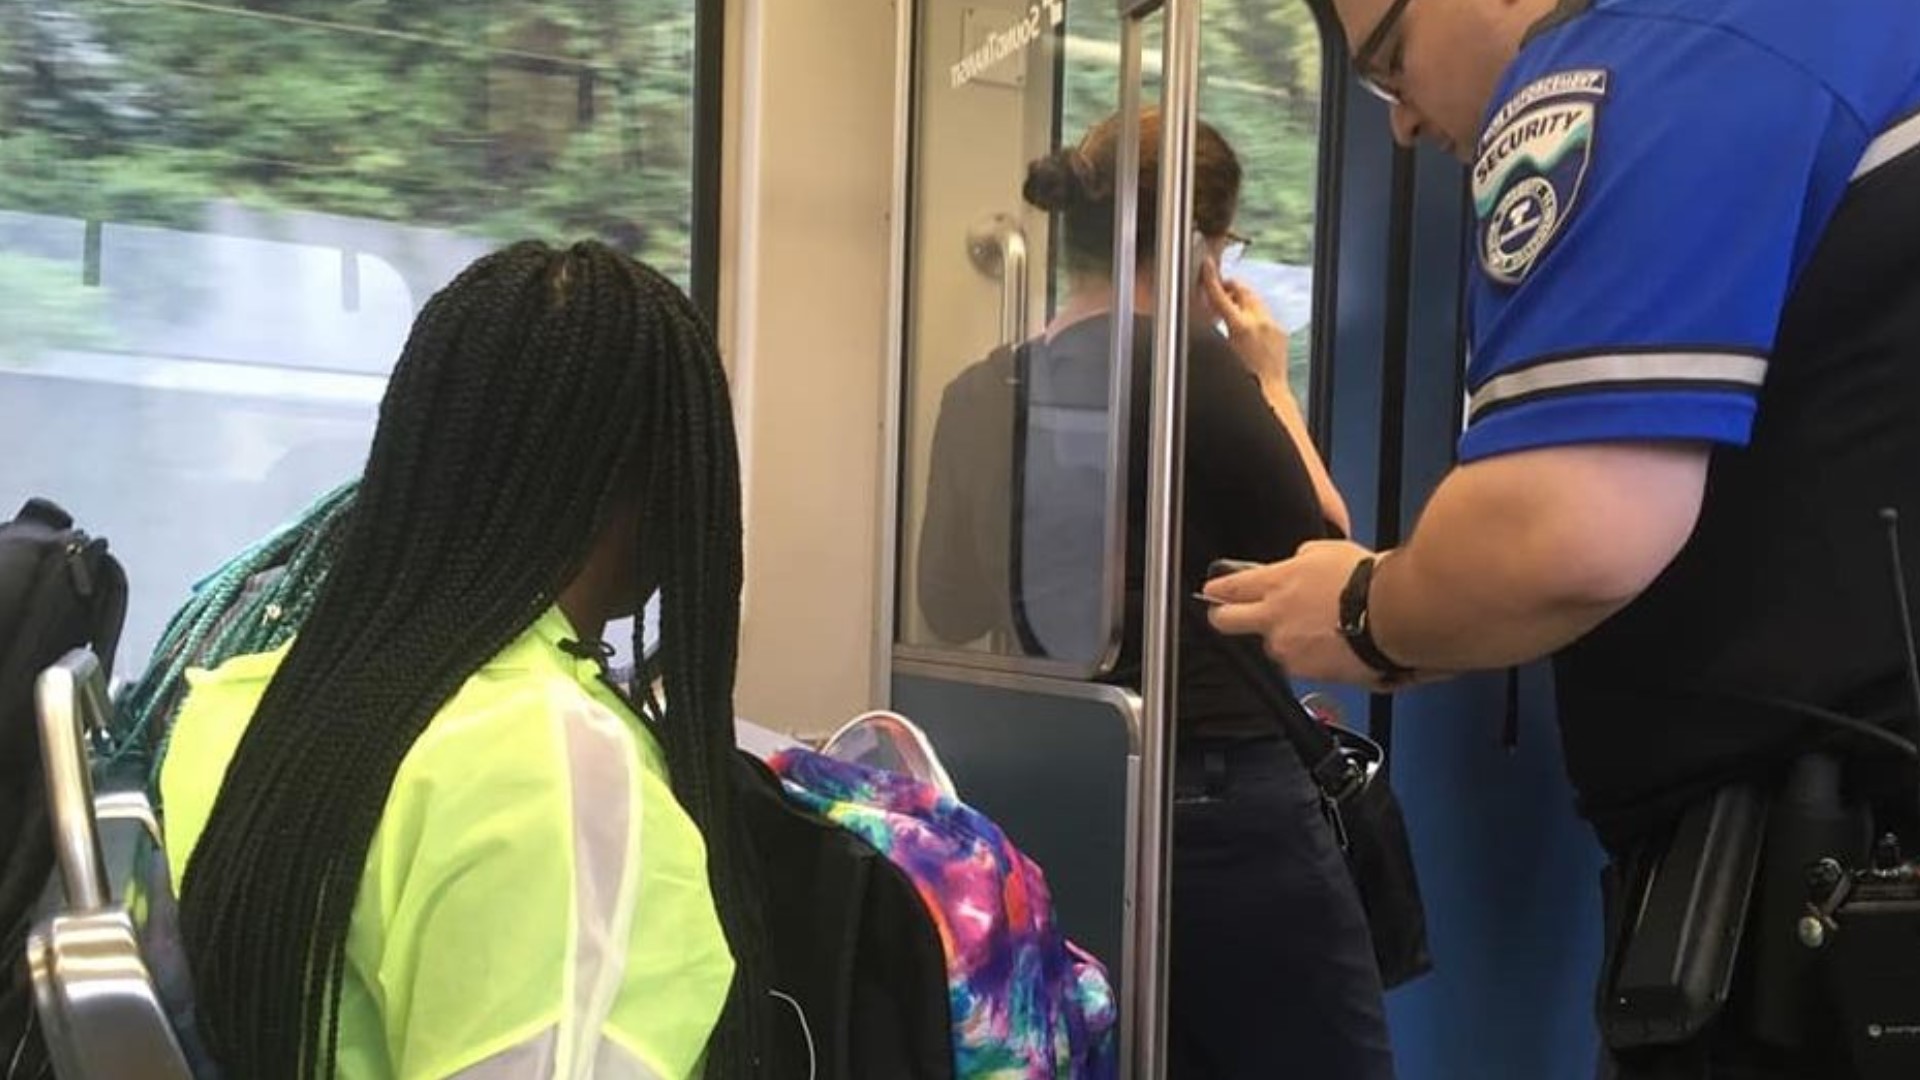 Fare enforcement officers stopped teens on their way to their first day of school. The students didn't have transit passes because they were going to pick them up at school.